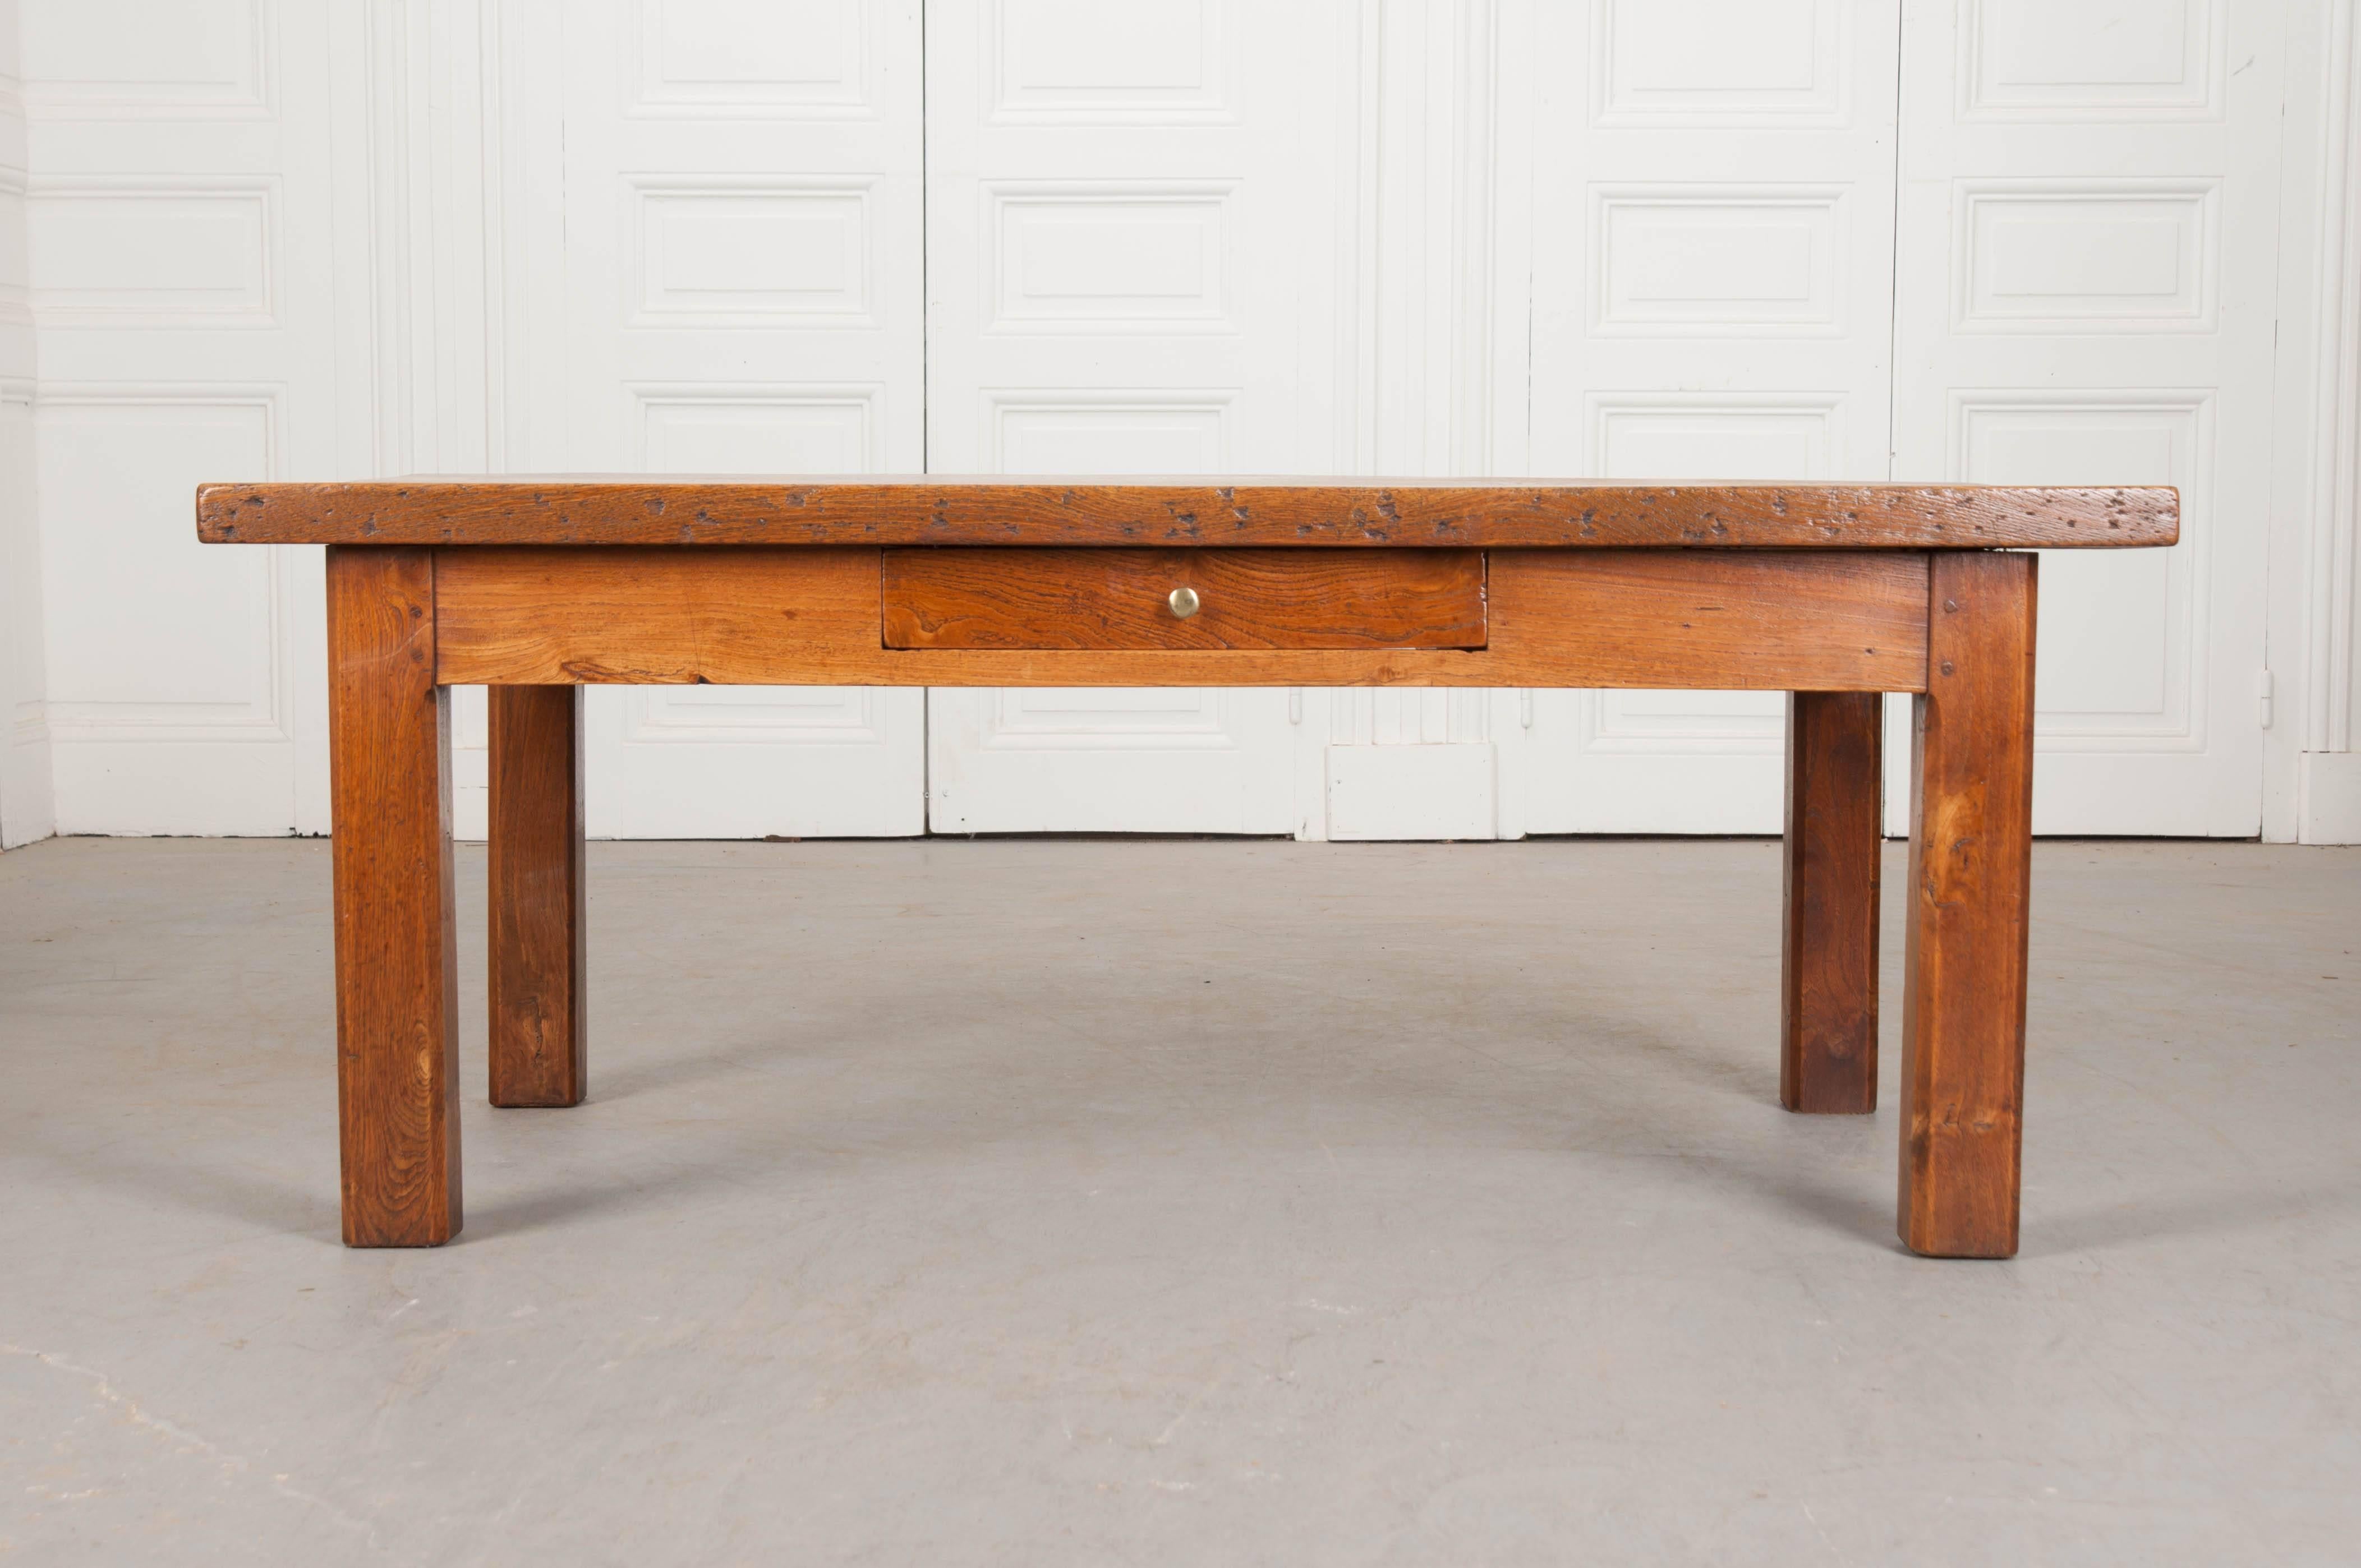 A French provincial chestnut coffee table from 19th century France. Two thick, solid chestnut boards comprise the top of this exceptional low table. These boards contain marvelous burl and grains that can be found throughout the tabletop. The